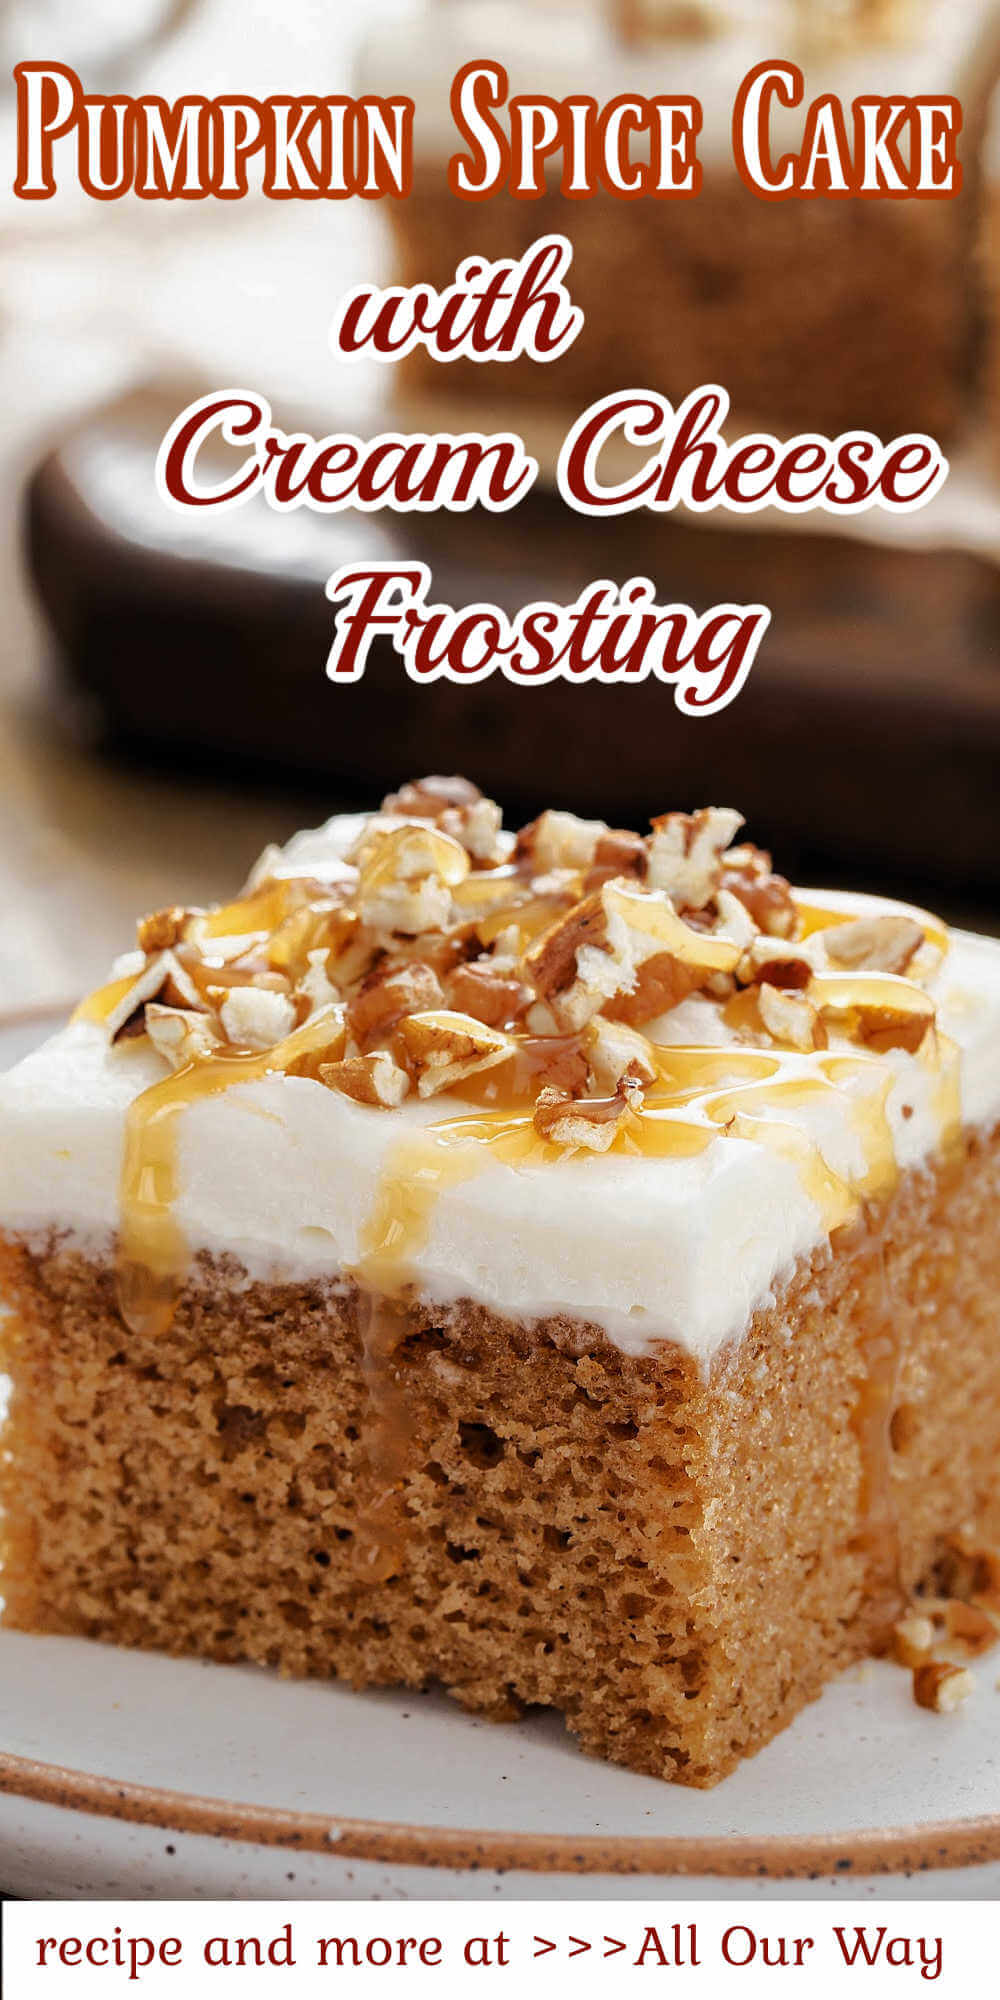 Pumpkin Spice Cake is an easy Fall-inspired cake made with pumpkin puree, warm spices, and a cream cheese frosting topped with crushed walnuts. Serve it as a dessert or sweet treat any time of the day.